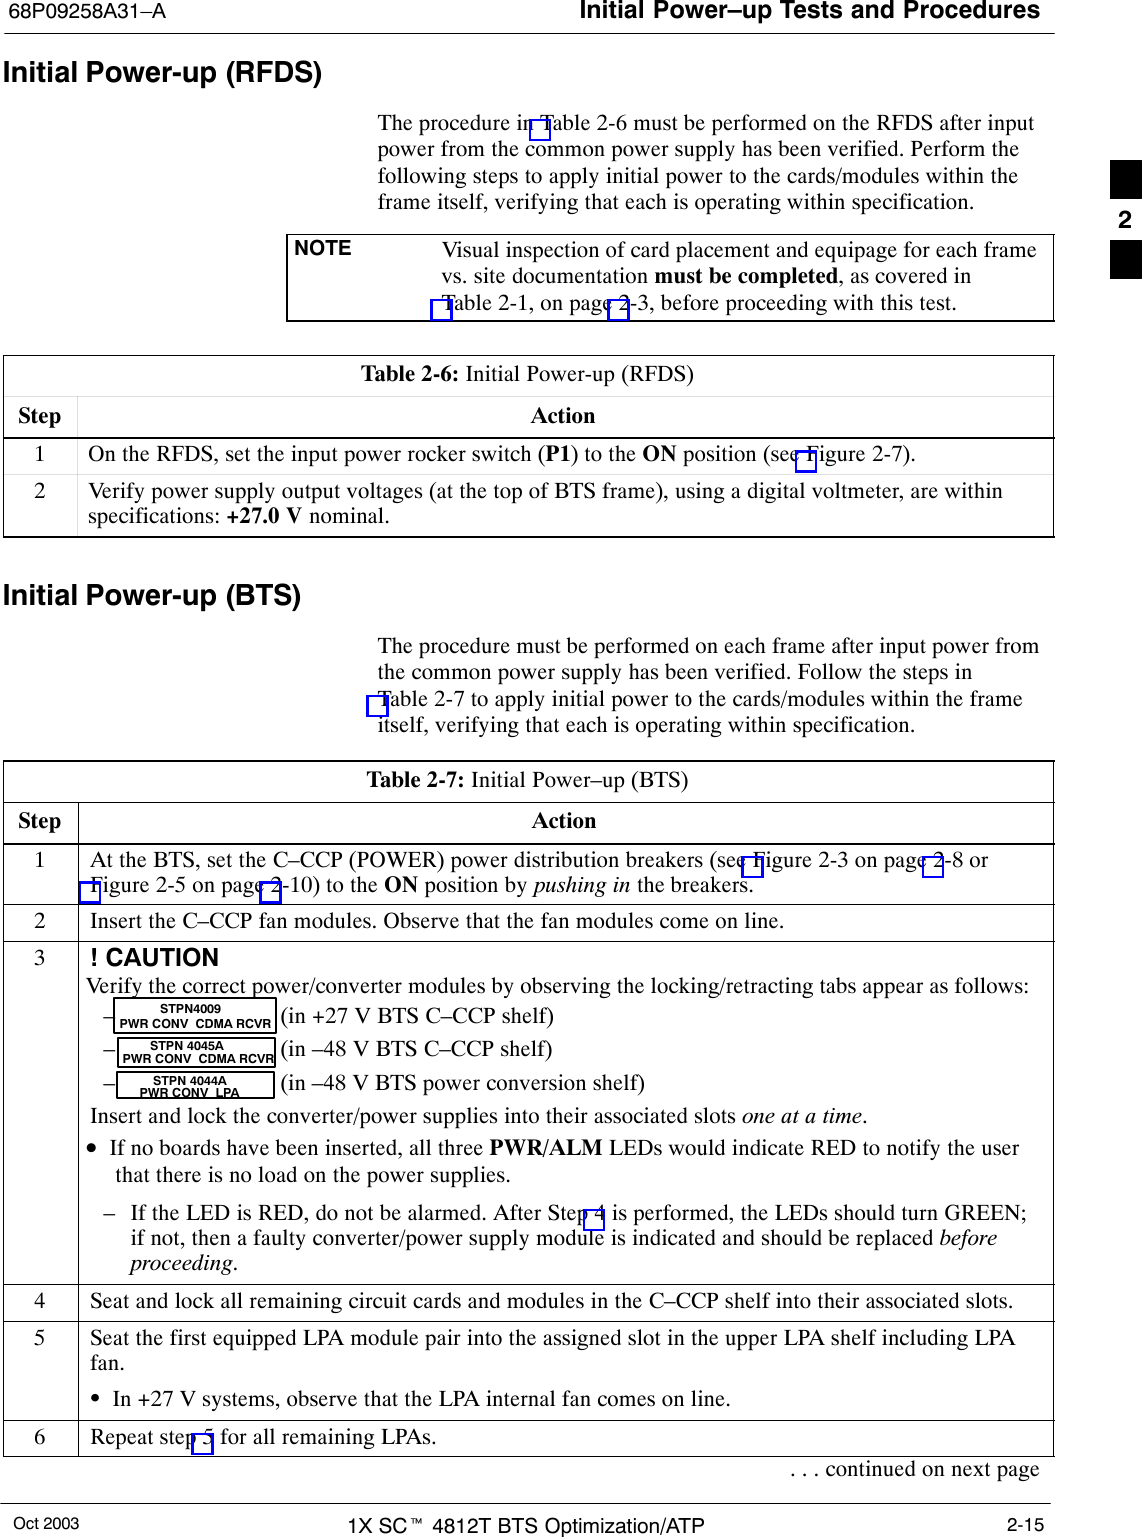 Initial Power–up Tests and Procedures68P09258A31–AOct 2003 1X SCt 4812T BTS Optimization/ATP 2-15Initial Power-up (RFDS)The procedure in Table 2-6 must be performed on the RFDS after inputpower from the common power supply has been verified. Perform thefollowing steps to apply initial power to the cards/modules within theframe itself, verifying that each is operating within specification.NOTE Visual inspection of card placement and equipage for each framevs. site documentation must be completed, as covered inTable 2-1, on page 2-3, before proceeding with this test.Table 2-6: Initial Power-up (RFDS)Step Action1On the RFDS, set the input power rocker switch (P1) to the ON position (see Figure 2-7).2Verify power supply output voltages (at the top of BTS frame), using a digital voltmeter, are withinspecifications: +27.0 V nominal.Initial Power-up (BTS)The procedure must be performed on each frame after input power fromthe common power supply has been verified. Follow the steps inTable 2-7 to apply initial power to the cards/modules within the frameitself, verifying that each is operating within specification.Table 2-7: Initial Power–up (BTS)Step Action1At the BTS, set the C–CCP (POWER) power distribution breakers (see Figure 2-3 on page 2-8 orFigure 2-5 on page 2-10) to the ON position by pushing in the breakers.2Insert the C–CCP fan modules. Observe that the fan modules come on line.3! CAUTIONVerify the correct power/converter modules by observing the locking/retracting tabs appear as follows:– (in +27 V BTS C–CCP shelf)– (in –48 V BTS C–CCP shelf)– (in –48 V BTS power conversion shelf)Insert and lock the converter/power supplies into their associated slots one at a time.•If no boards have been inserted, all three PWR/ALM LEDs would indicate RED to notify the userthat there is no load on the power supplies.– If the LED is RED, do not be alarmed. After Step 4 is performed, the LEDs should turn GREEN;if not, then a faulty converter/power supply module is indicated and should be replaced beforeproceeding.STPN 4045APWR CONV  CDMA RCVRSTPN 4044APWR CONV  LPASTPN4009PWR CONV  CDMA RCVR4Seat and lock all remaining circuit cards and modules in the C–CCP shelf into their associated slots.5Seat the first equipped LPA module pair into the assigned slot in the upper LPA shelf including LPAfan.SIn +27 V systems, observe that the LPA internal fan comes on line.6Repeat step 5 for all remaining LPAs.. . . continued on next page2